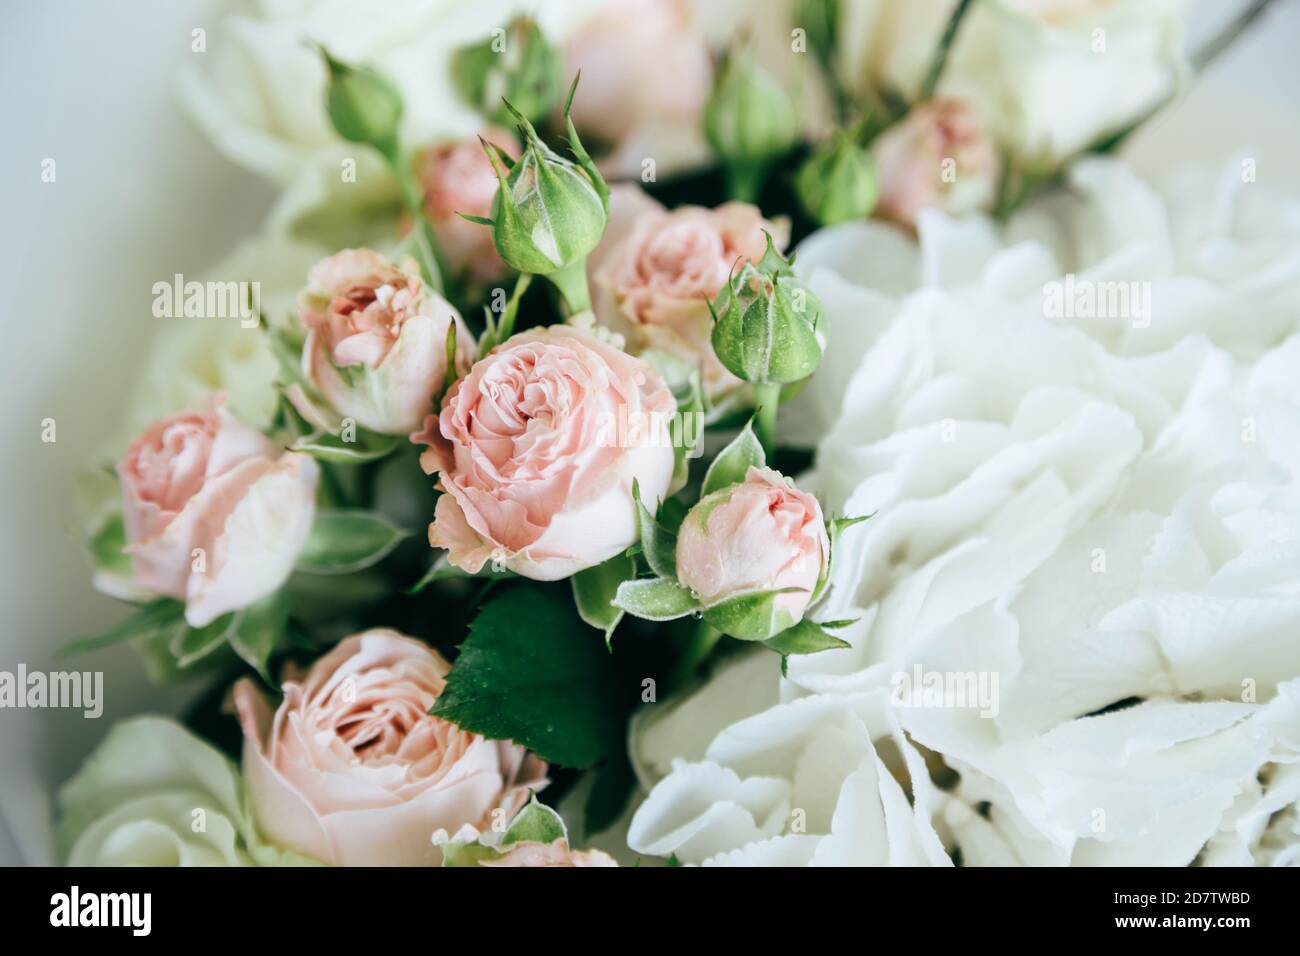 A beautiful soft background of small pink roses and white hortensia, close up view Stock Photo